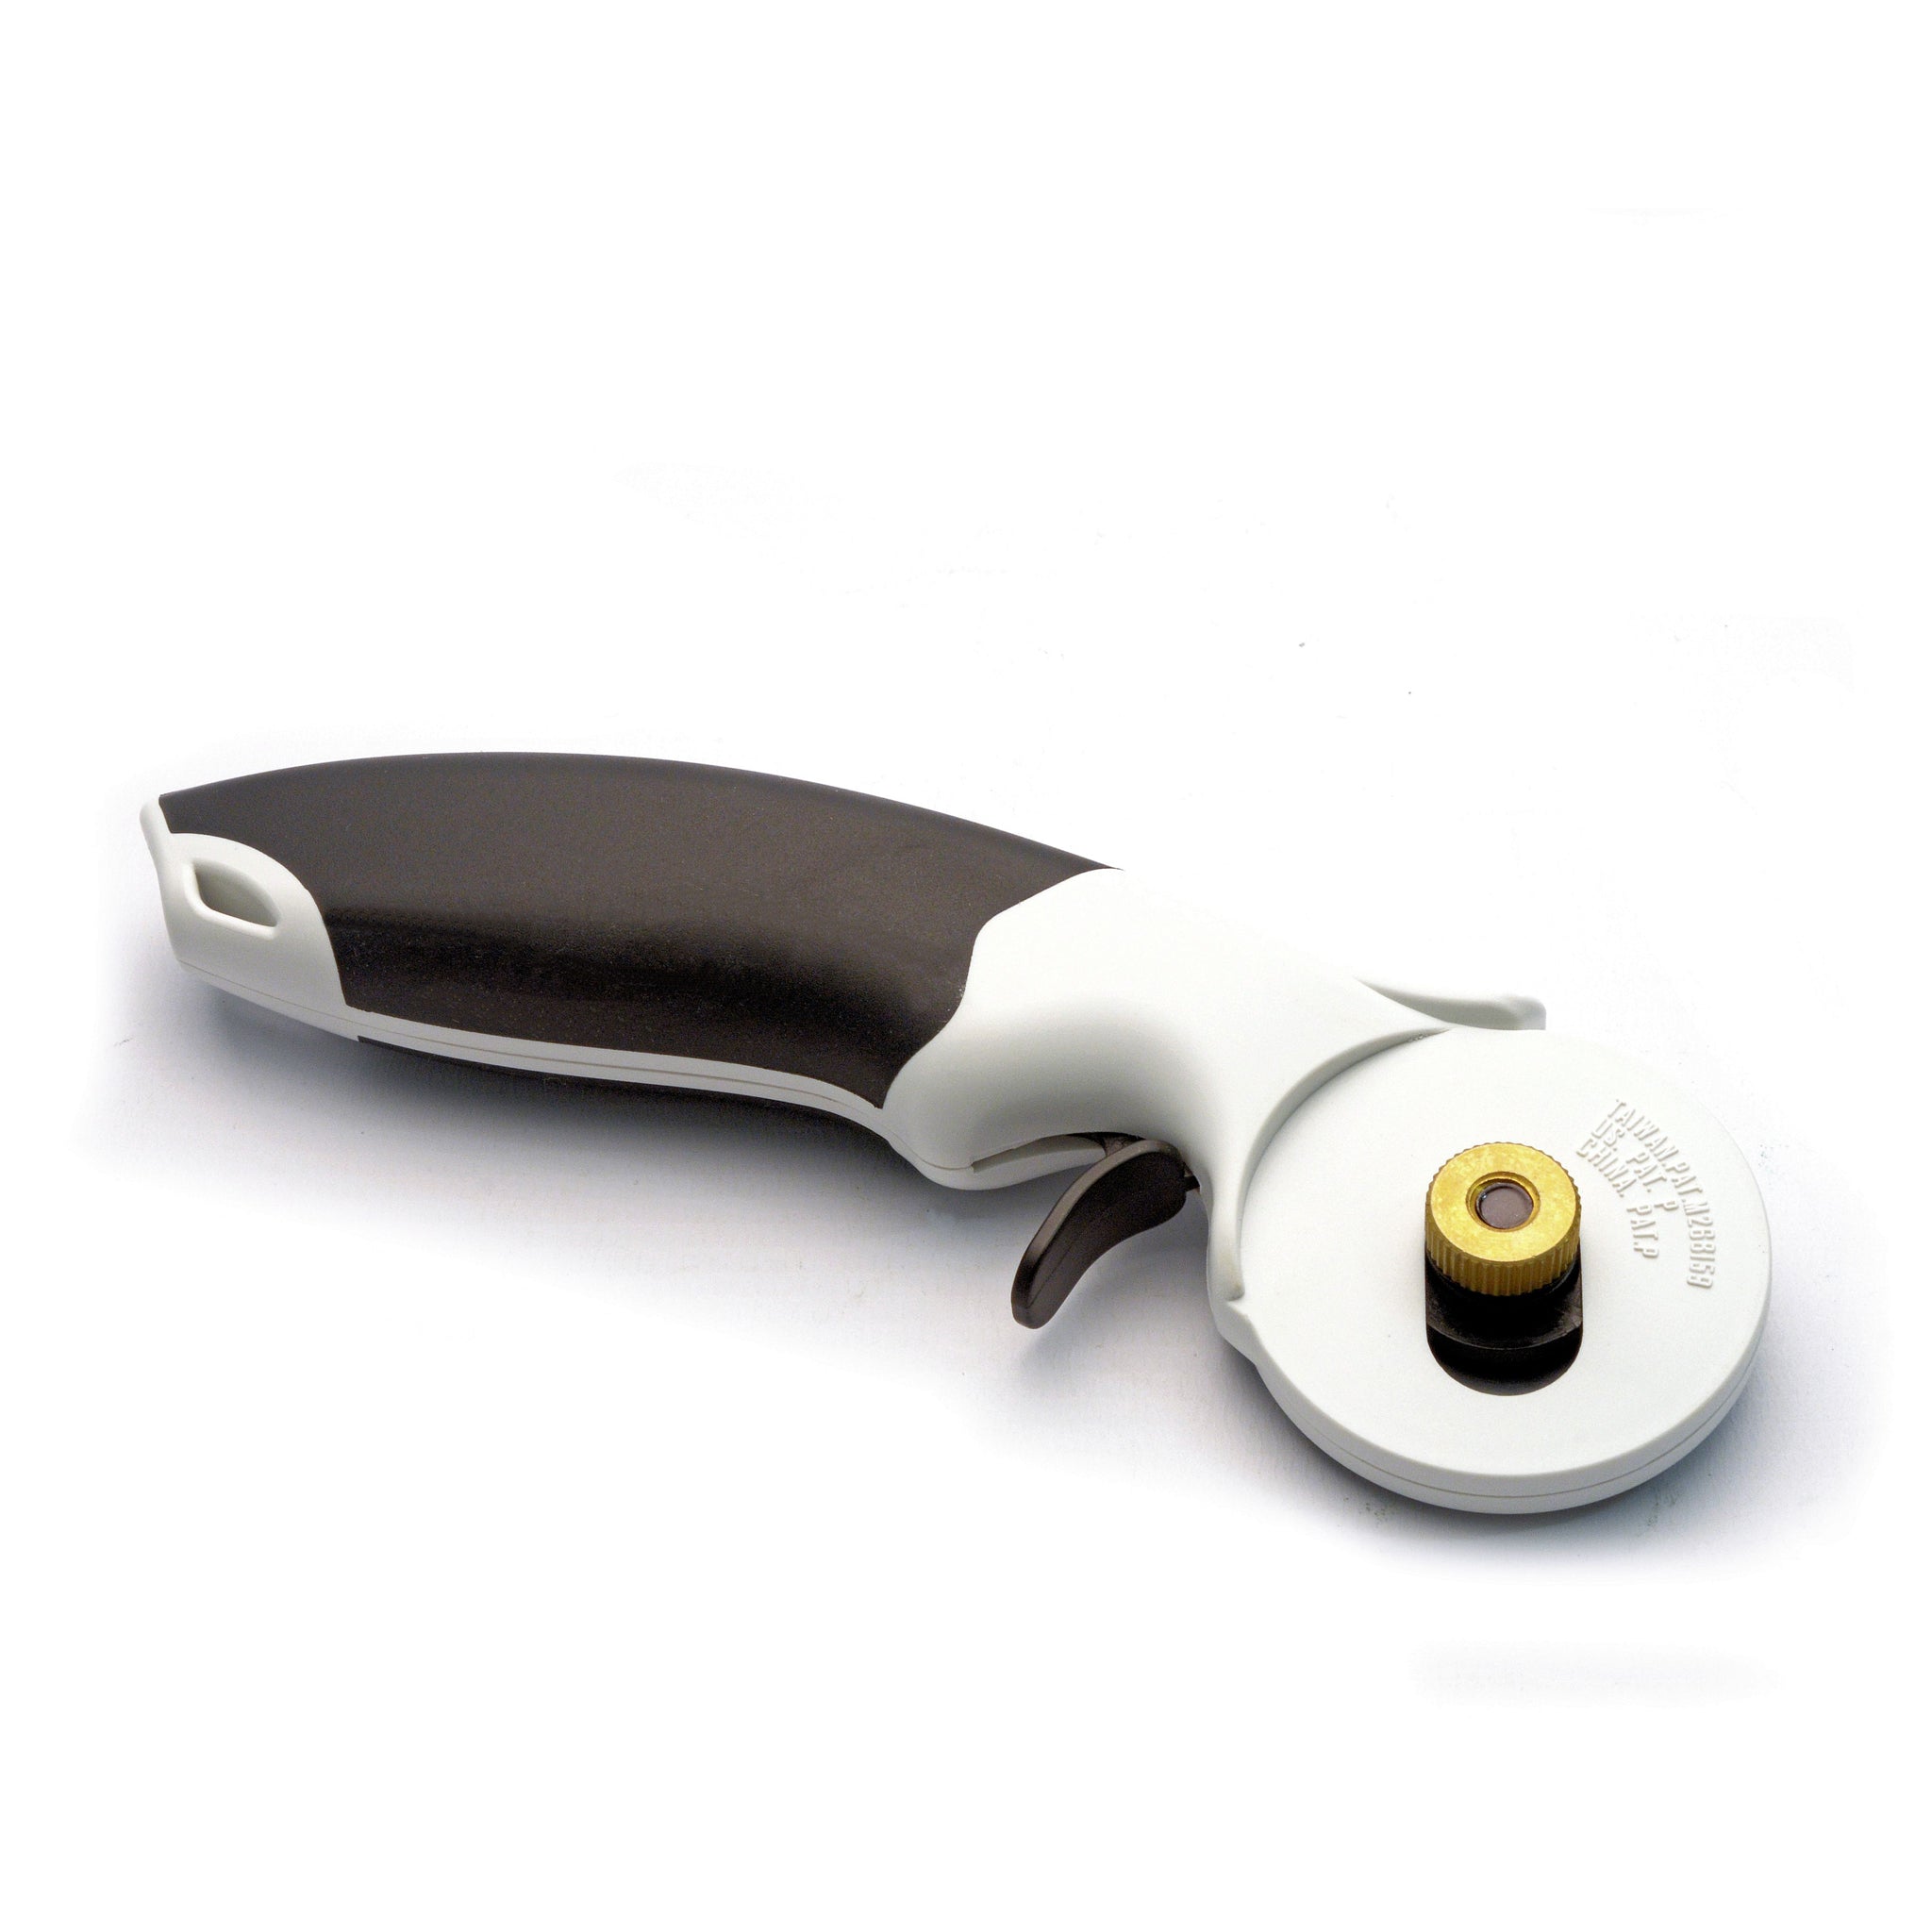 Easy Grip Rotary Cutter from Identity Leathercraft